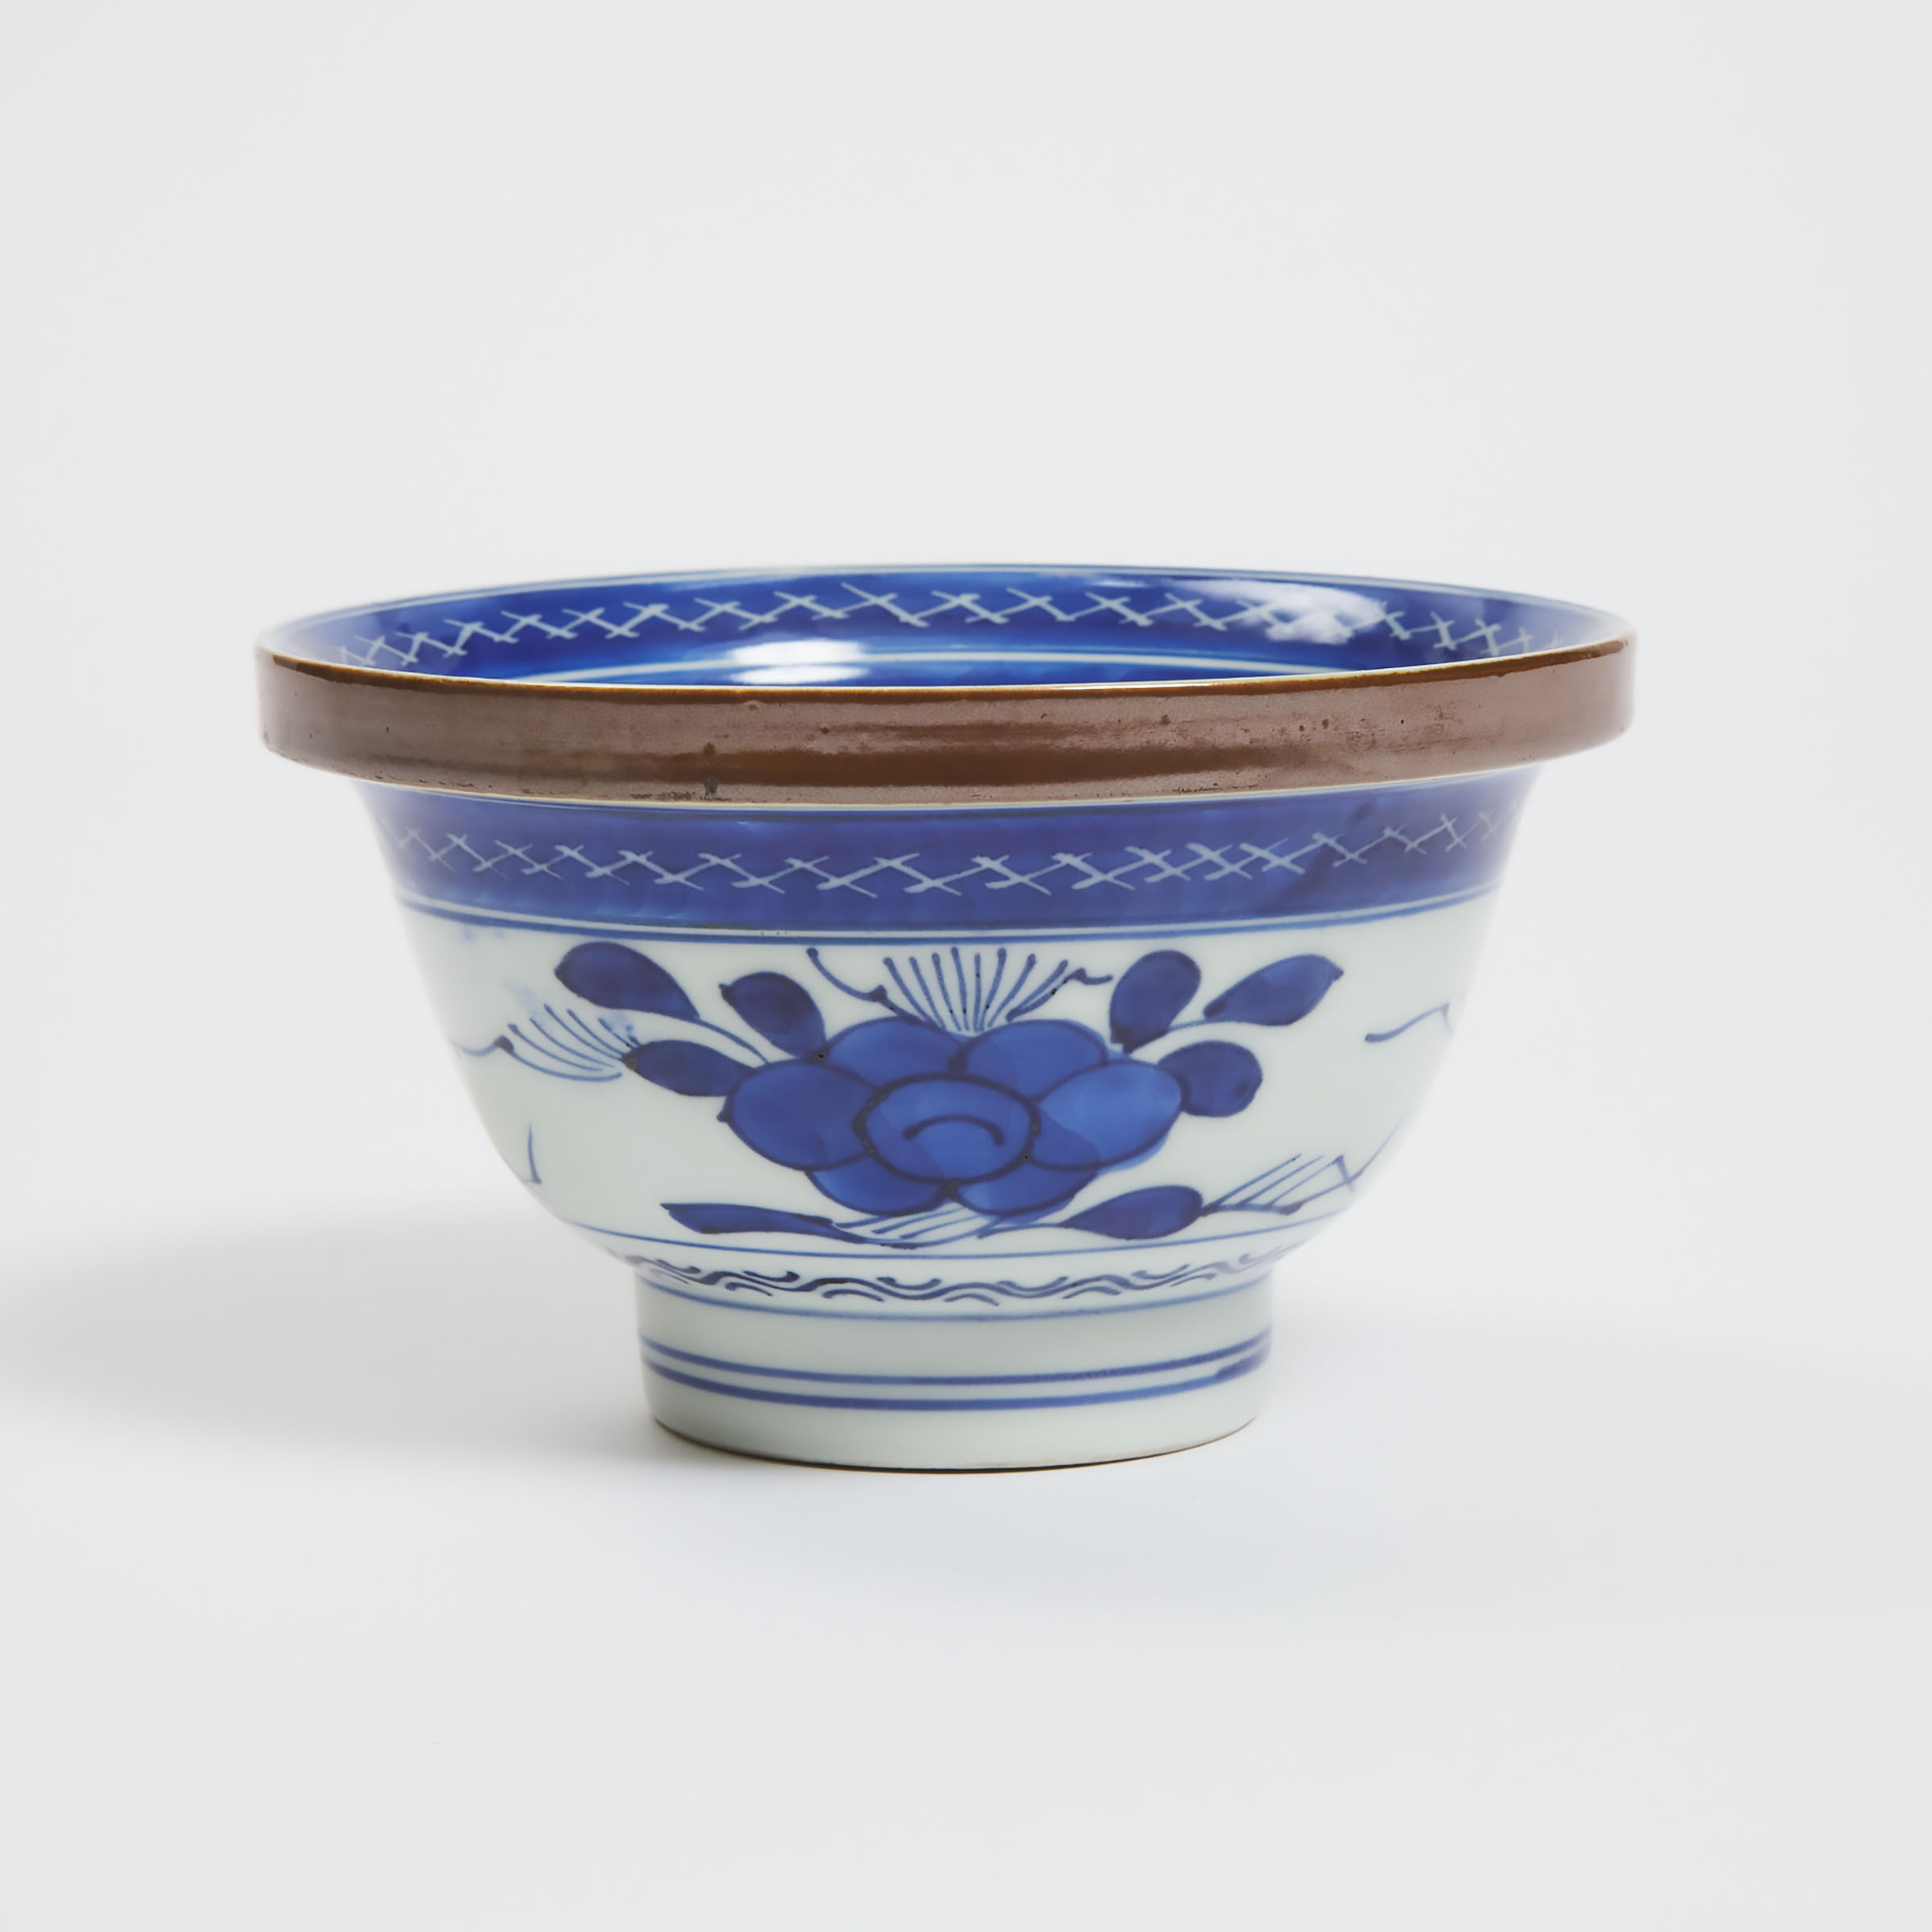 A Rare Japanese Imitation Chinese Swatow Export Blue and White Bowl, 18th Century